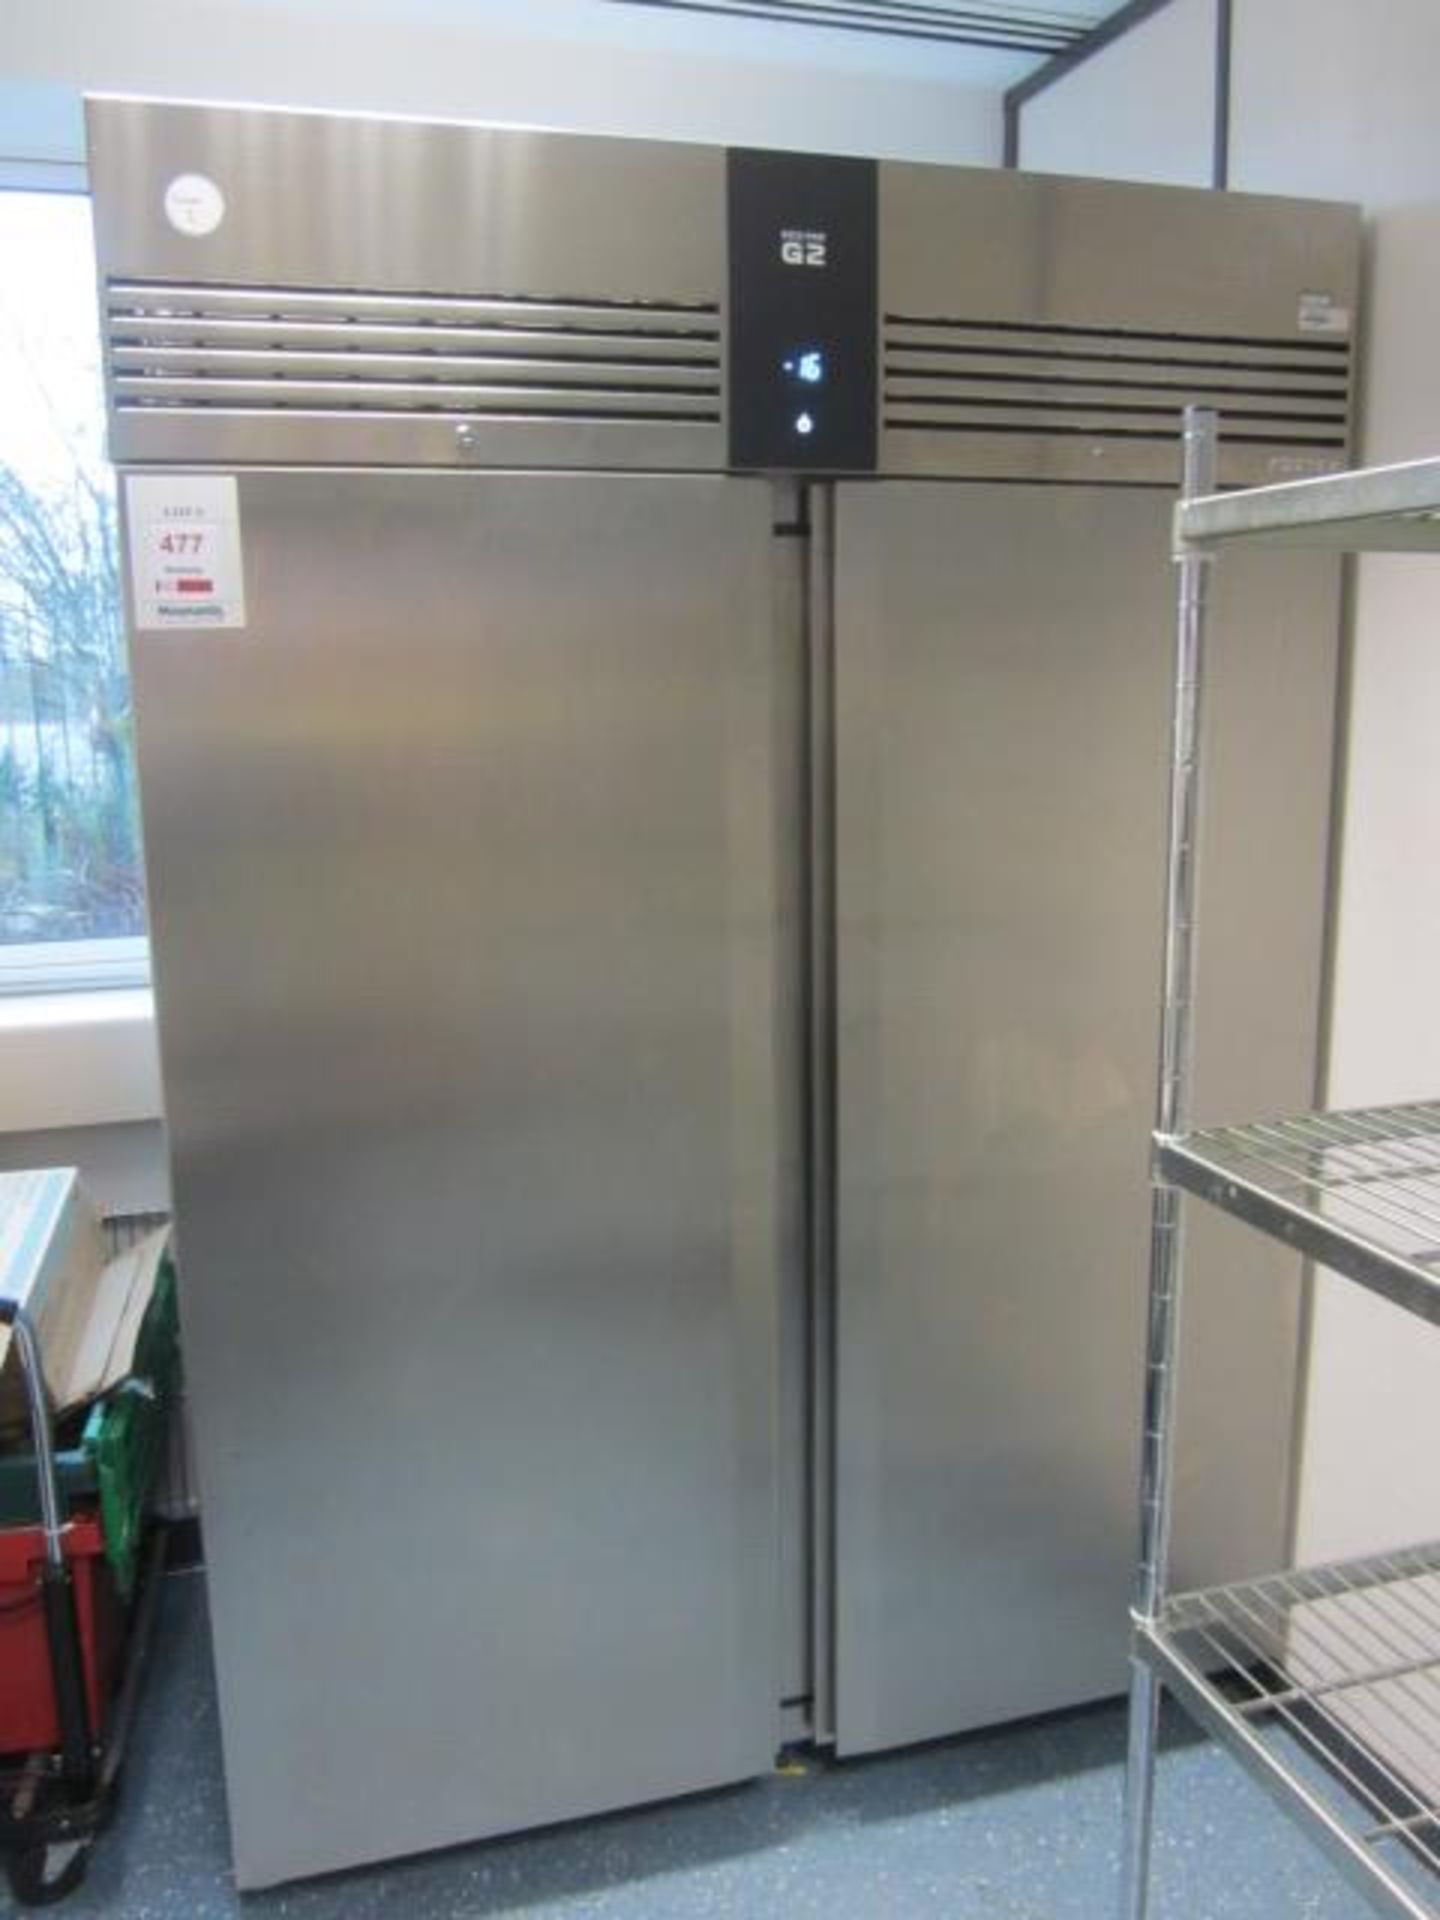 Foster Eco Pro 2 door stainless steel commercial freezer, model EP14406, serial no. E5463536,